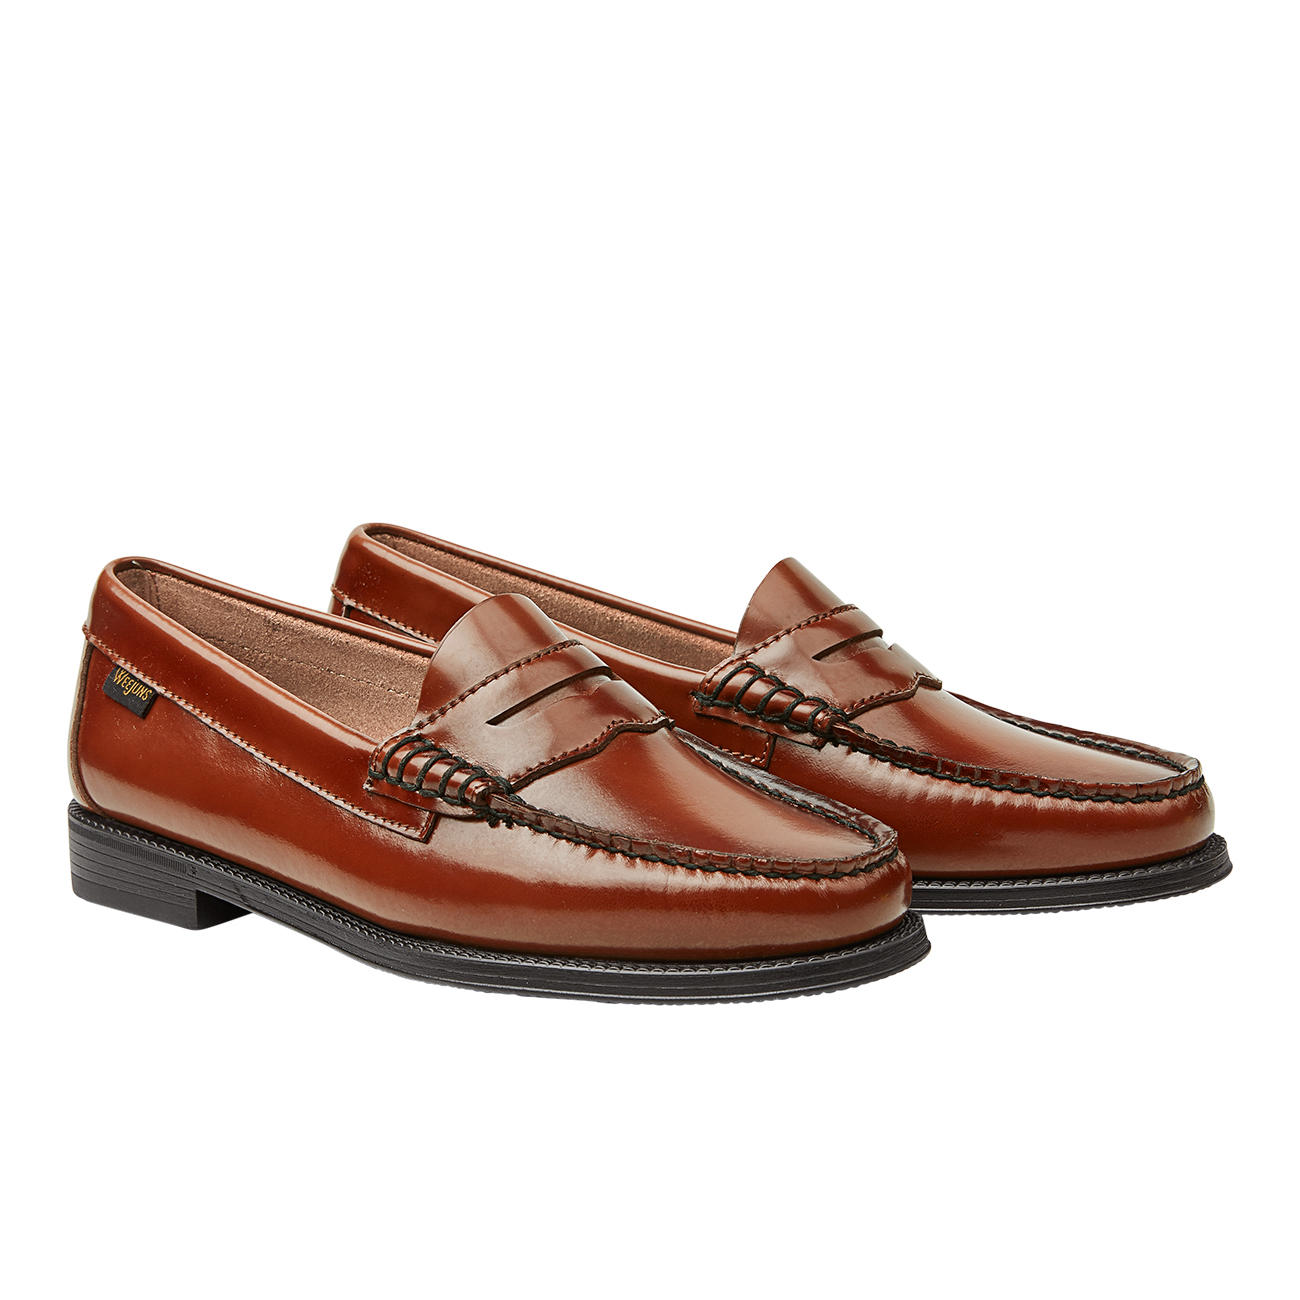 G. H. Bass Penny Loafers “Weejuns” discover